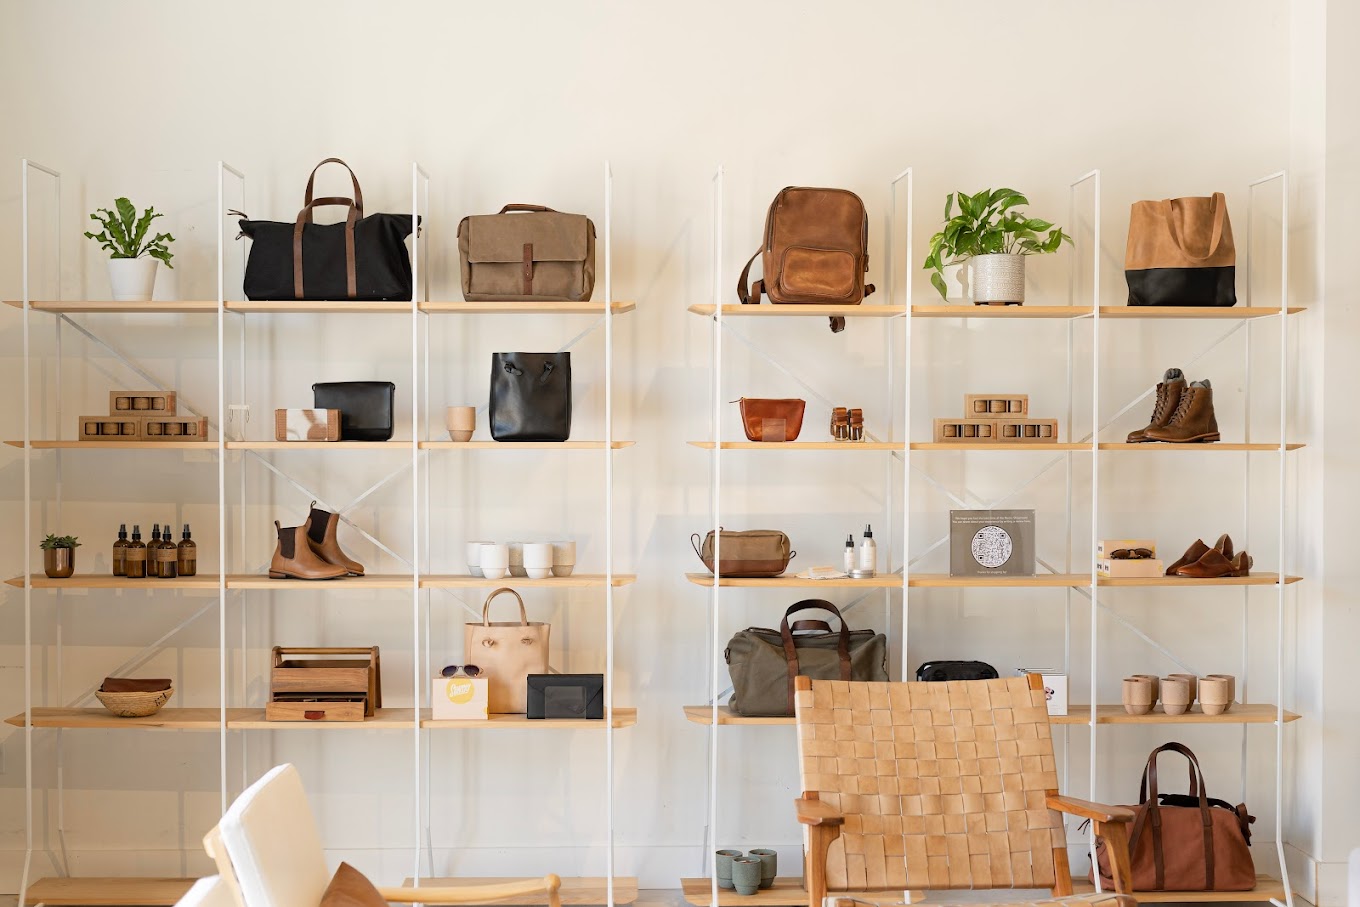 Nisolo's Nashville Showroom with sustainable shoes and bags